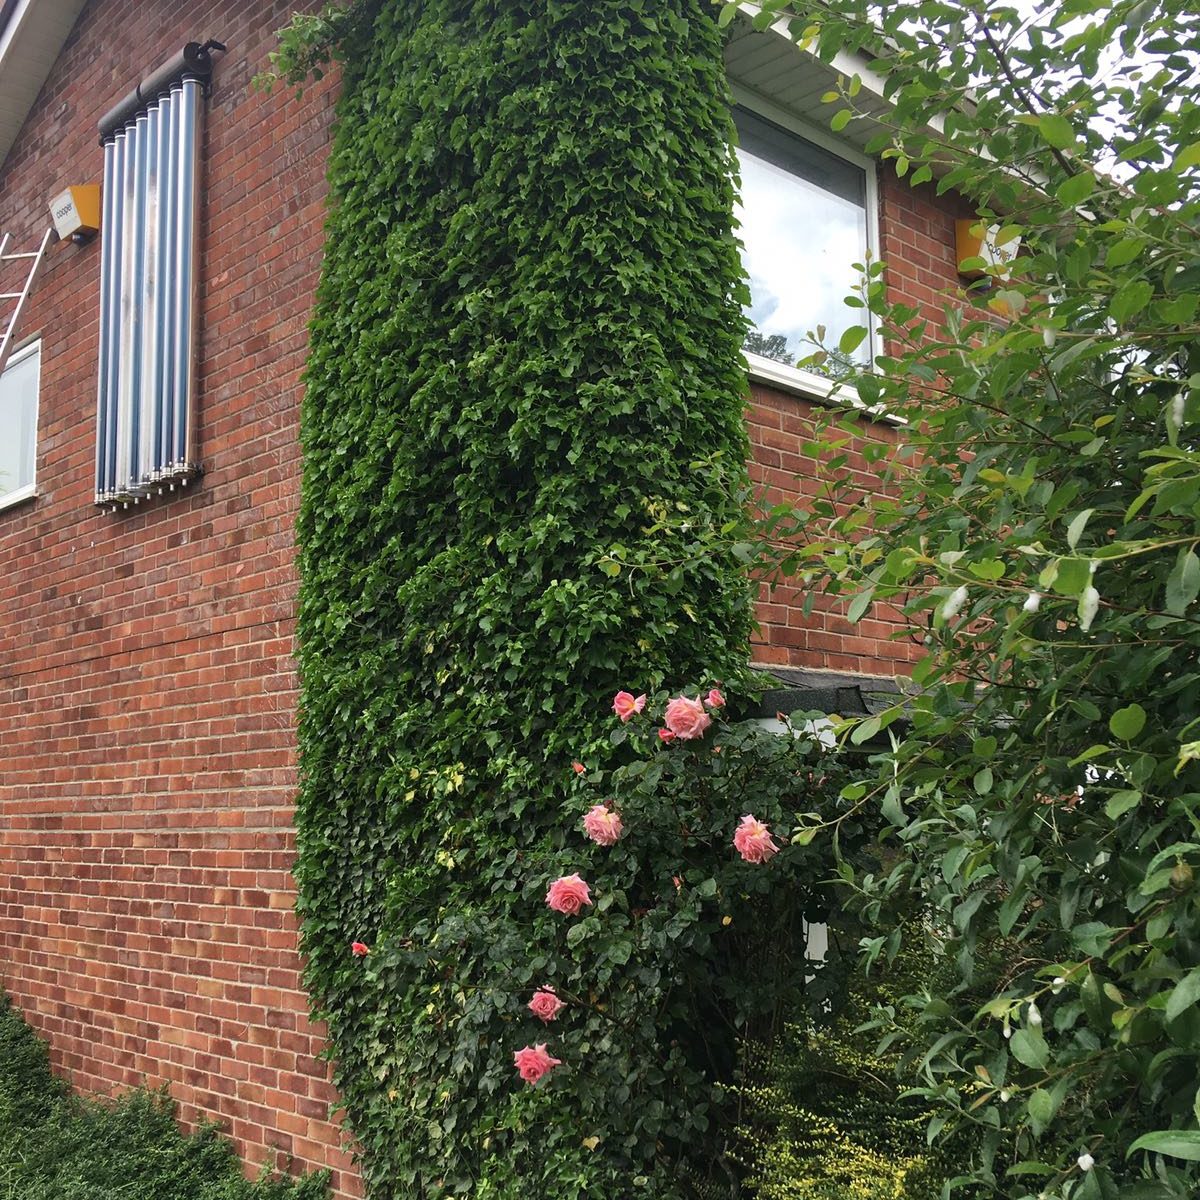 Ivy removal from brickwork and gutters of house